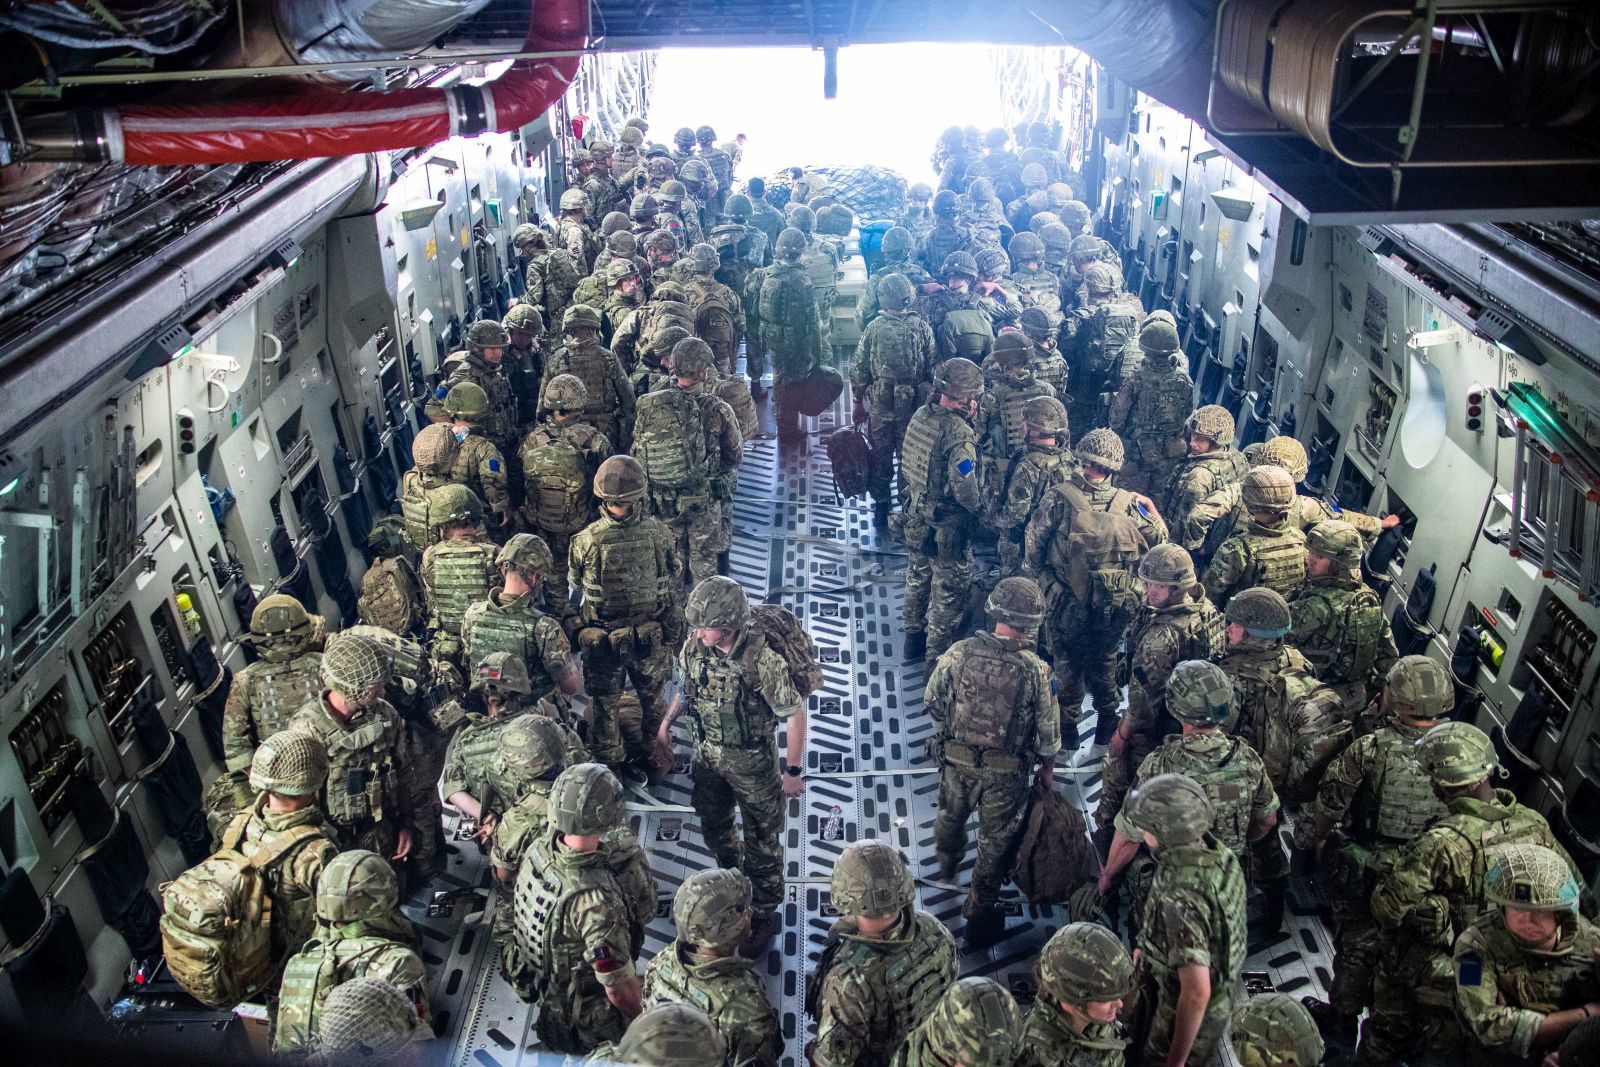 epa09415674 A handout picture provided by the British Ministry of Defence shows British Forces from 16 Air Assault Brigade on arrival in Kabul, Afghanistan, 15 August 2021. The military personnel are deployed to assist in evacuating British nationals and entitled persons as part of Operation PITTING amidst the worsening security situation there. The additional deployment of approximately 600 troops is to facilitate the safe and deliberate exit of remaining UK and eligible personnel.  EPA/Leading Hand BEN SHREAD / BRITISH MINISTRY OF DEFENCE / HANDOUT MANDATORY CREDIT: MOD/CROWN COPYRIGHT HANDOUT EDITORIAL USE ONLY/NO SALES